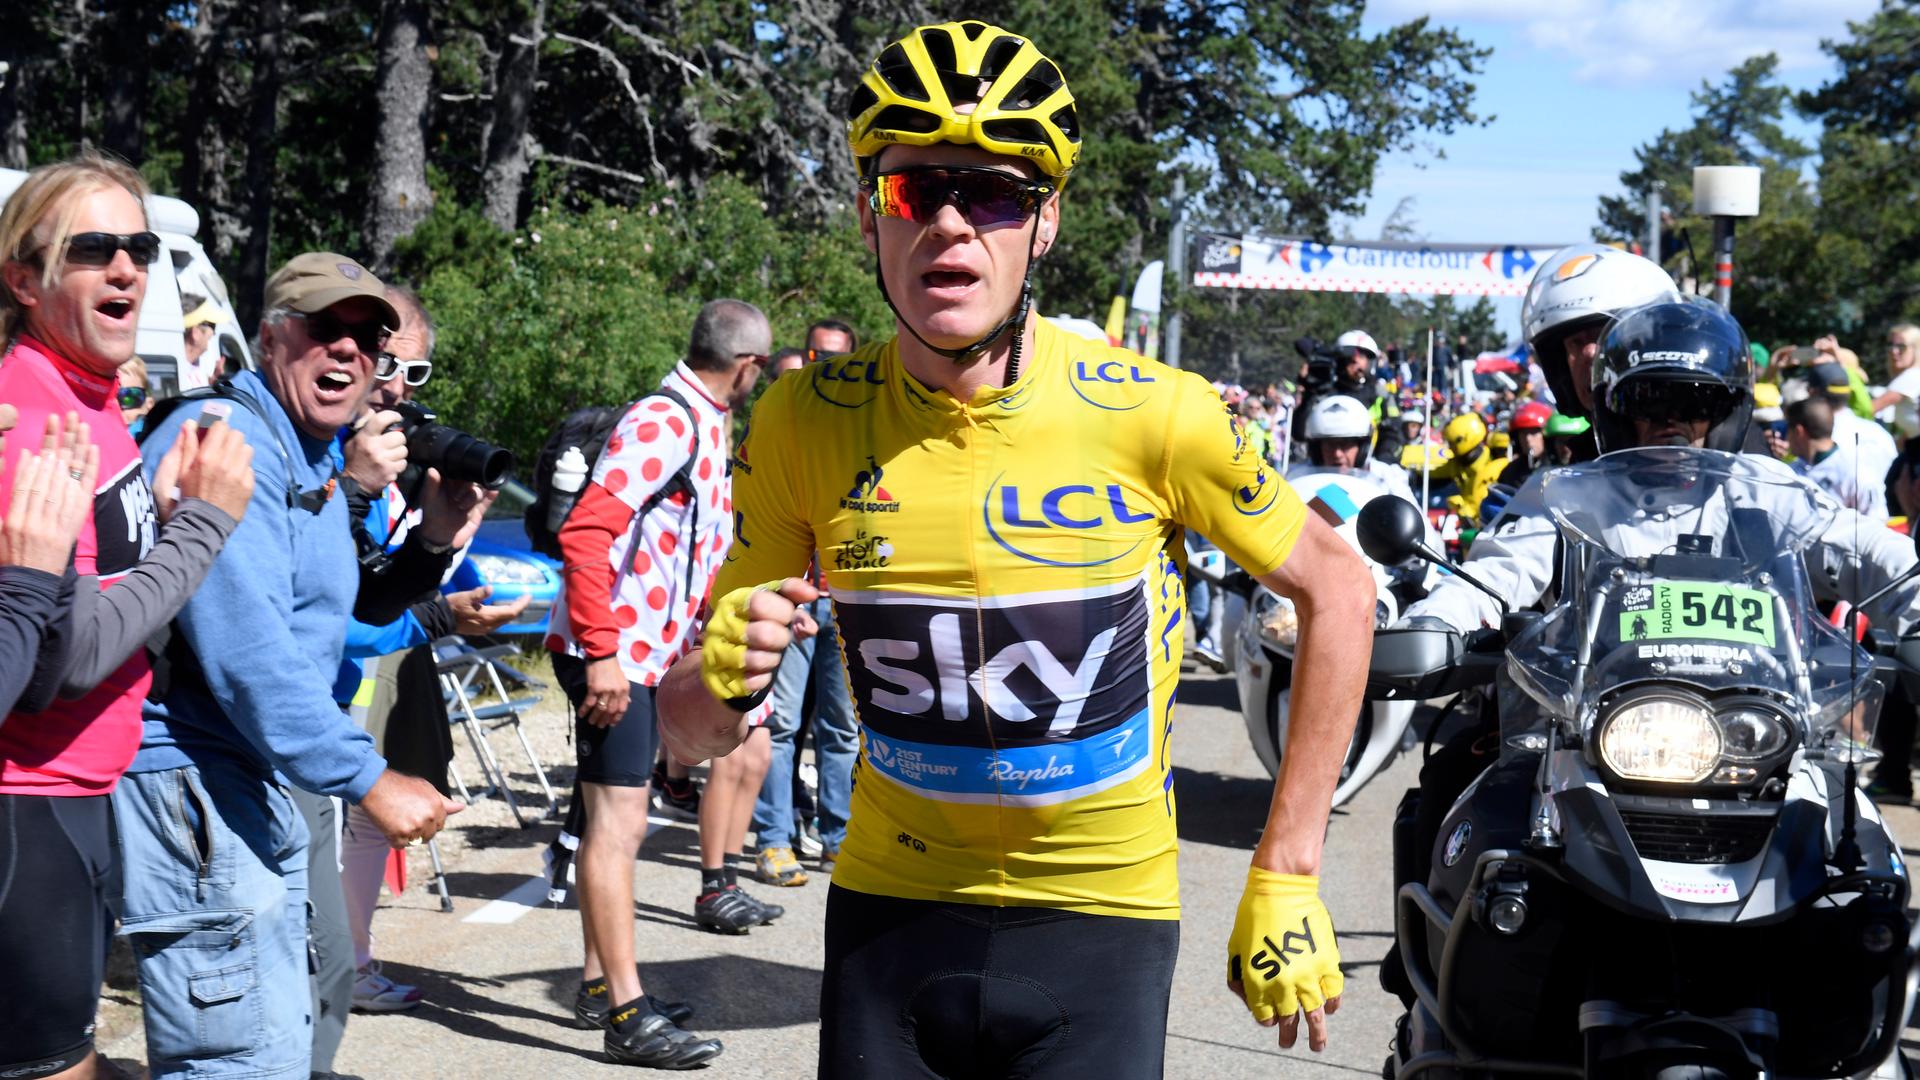 Yellow jersey leader Team Sky rider Chris Froome of Britain runs on the road after a fall.